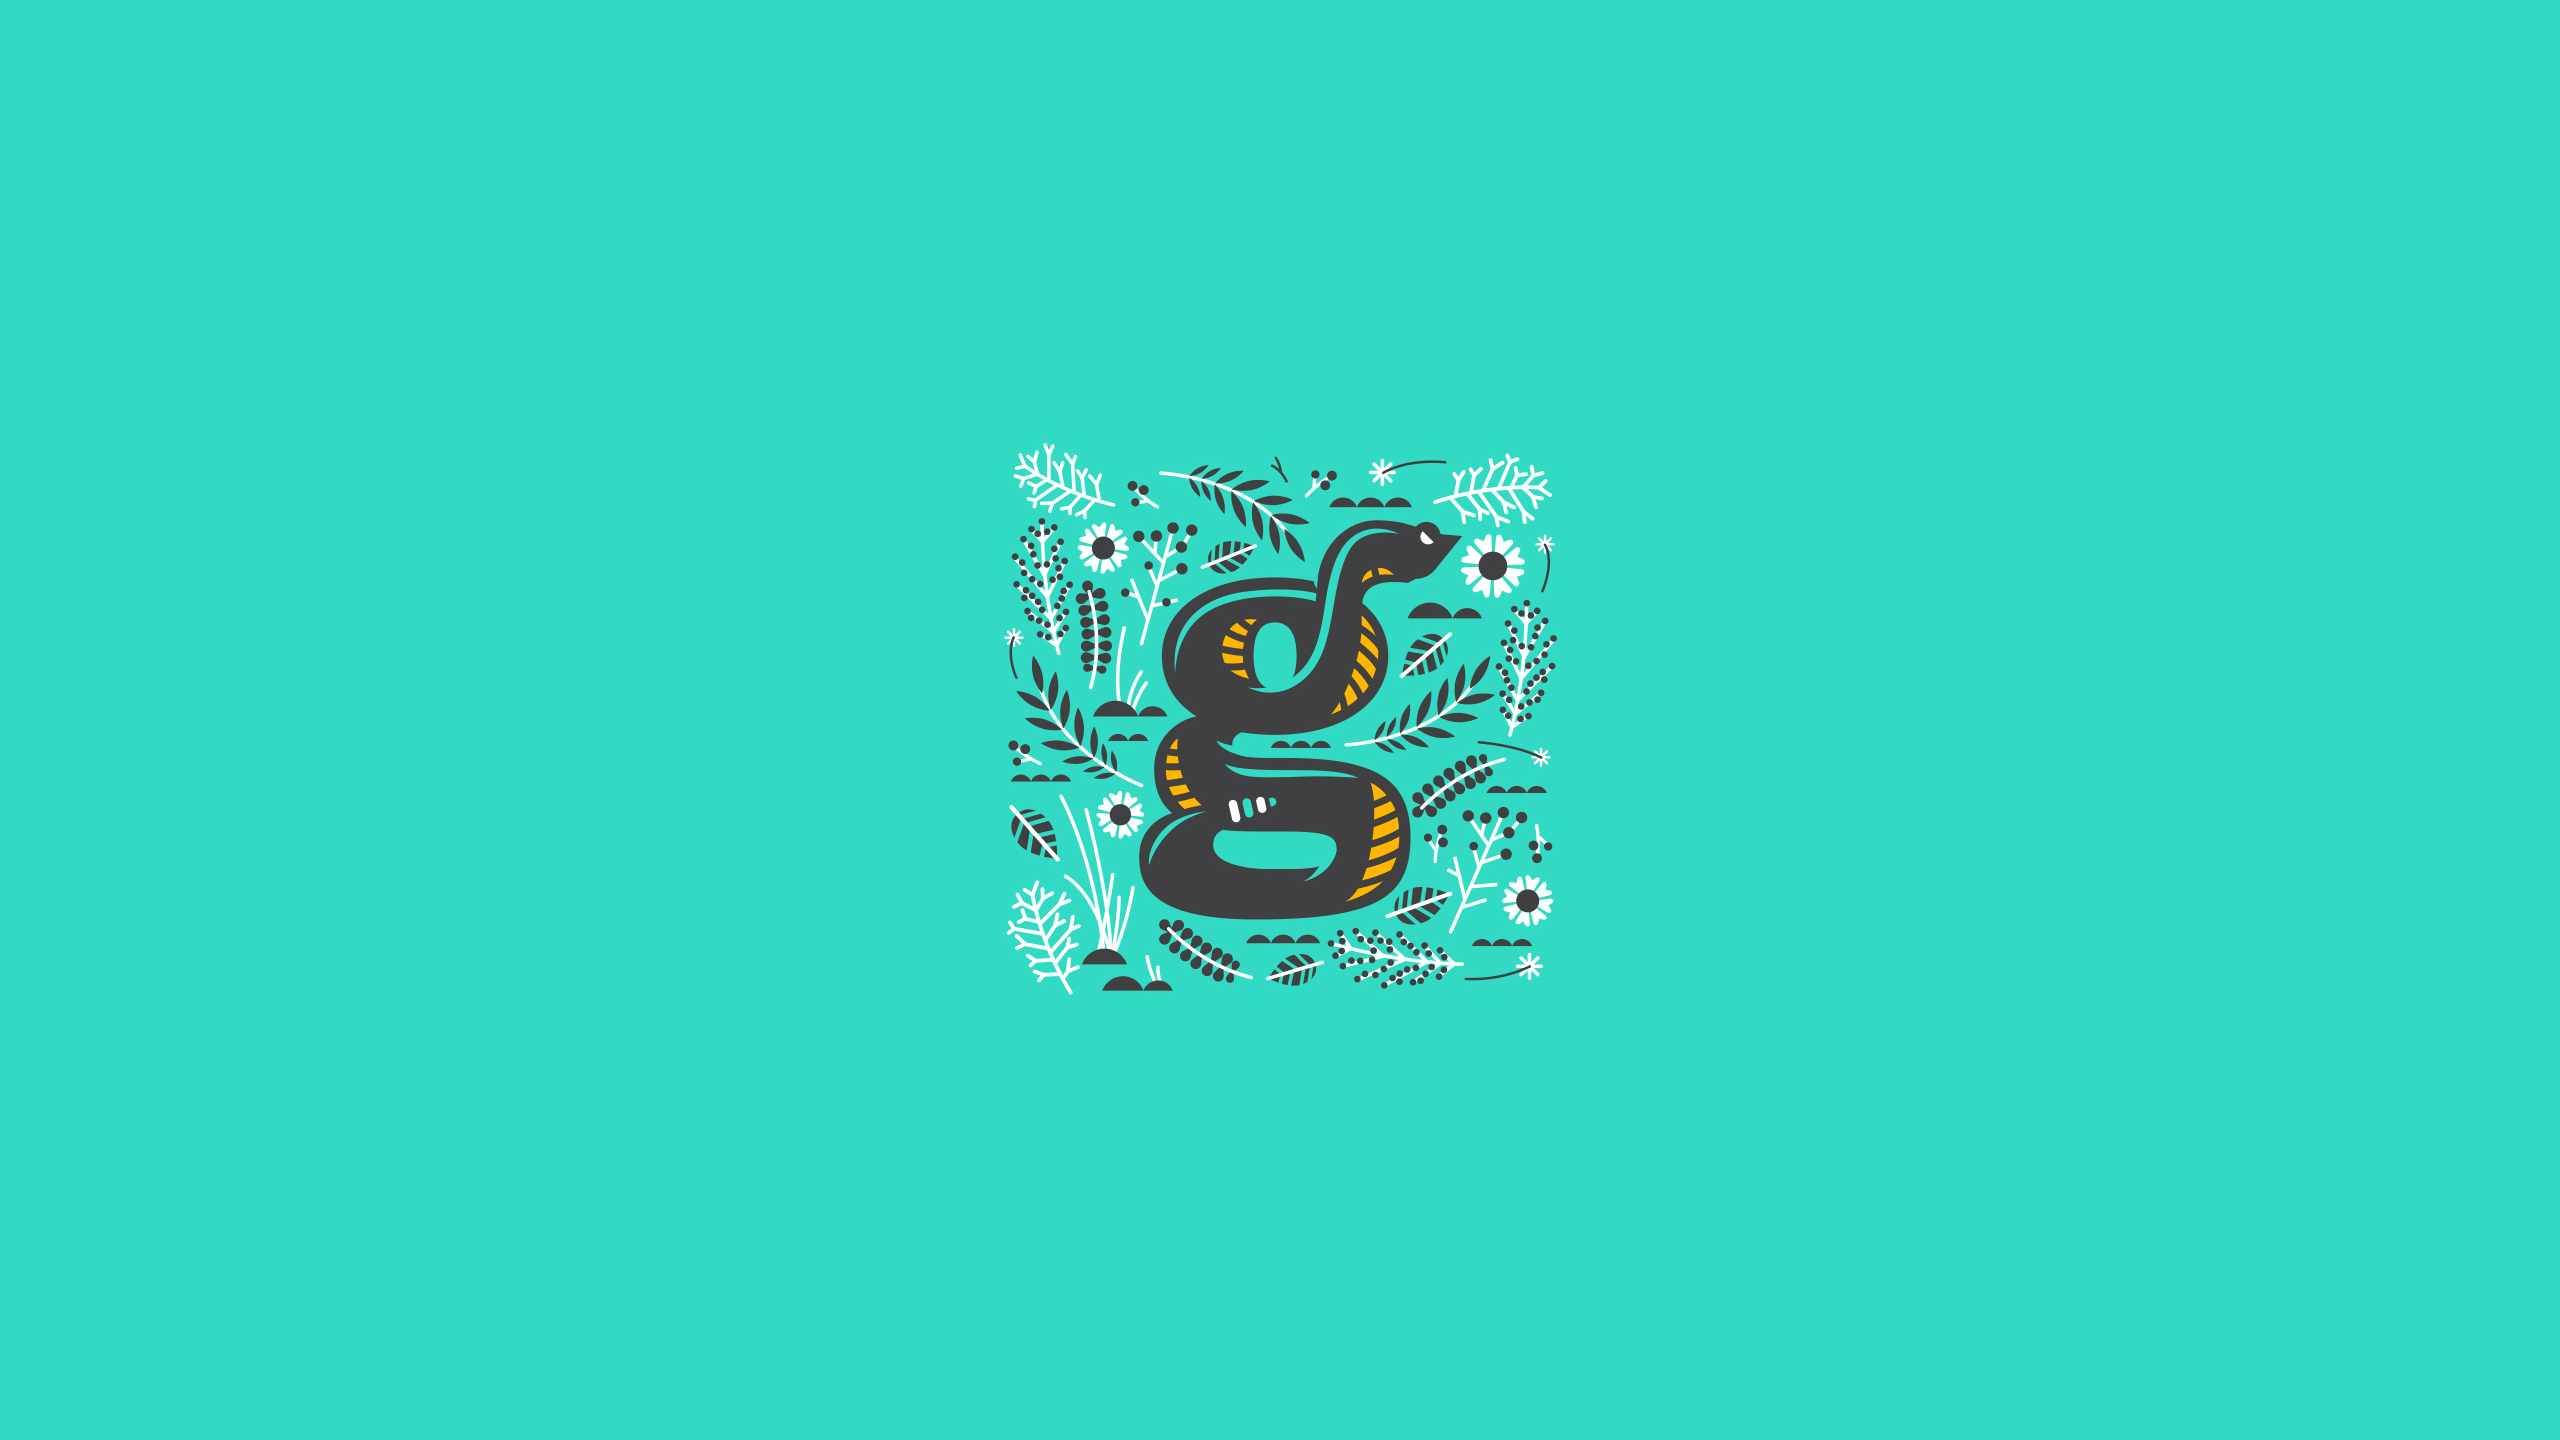 Illustration Letter Teal Turquoise Snake Typography Simple 2560x1440